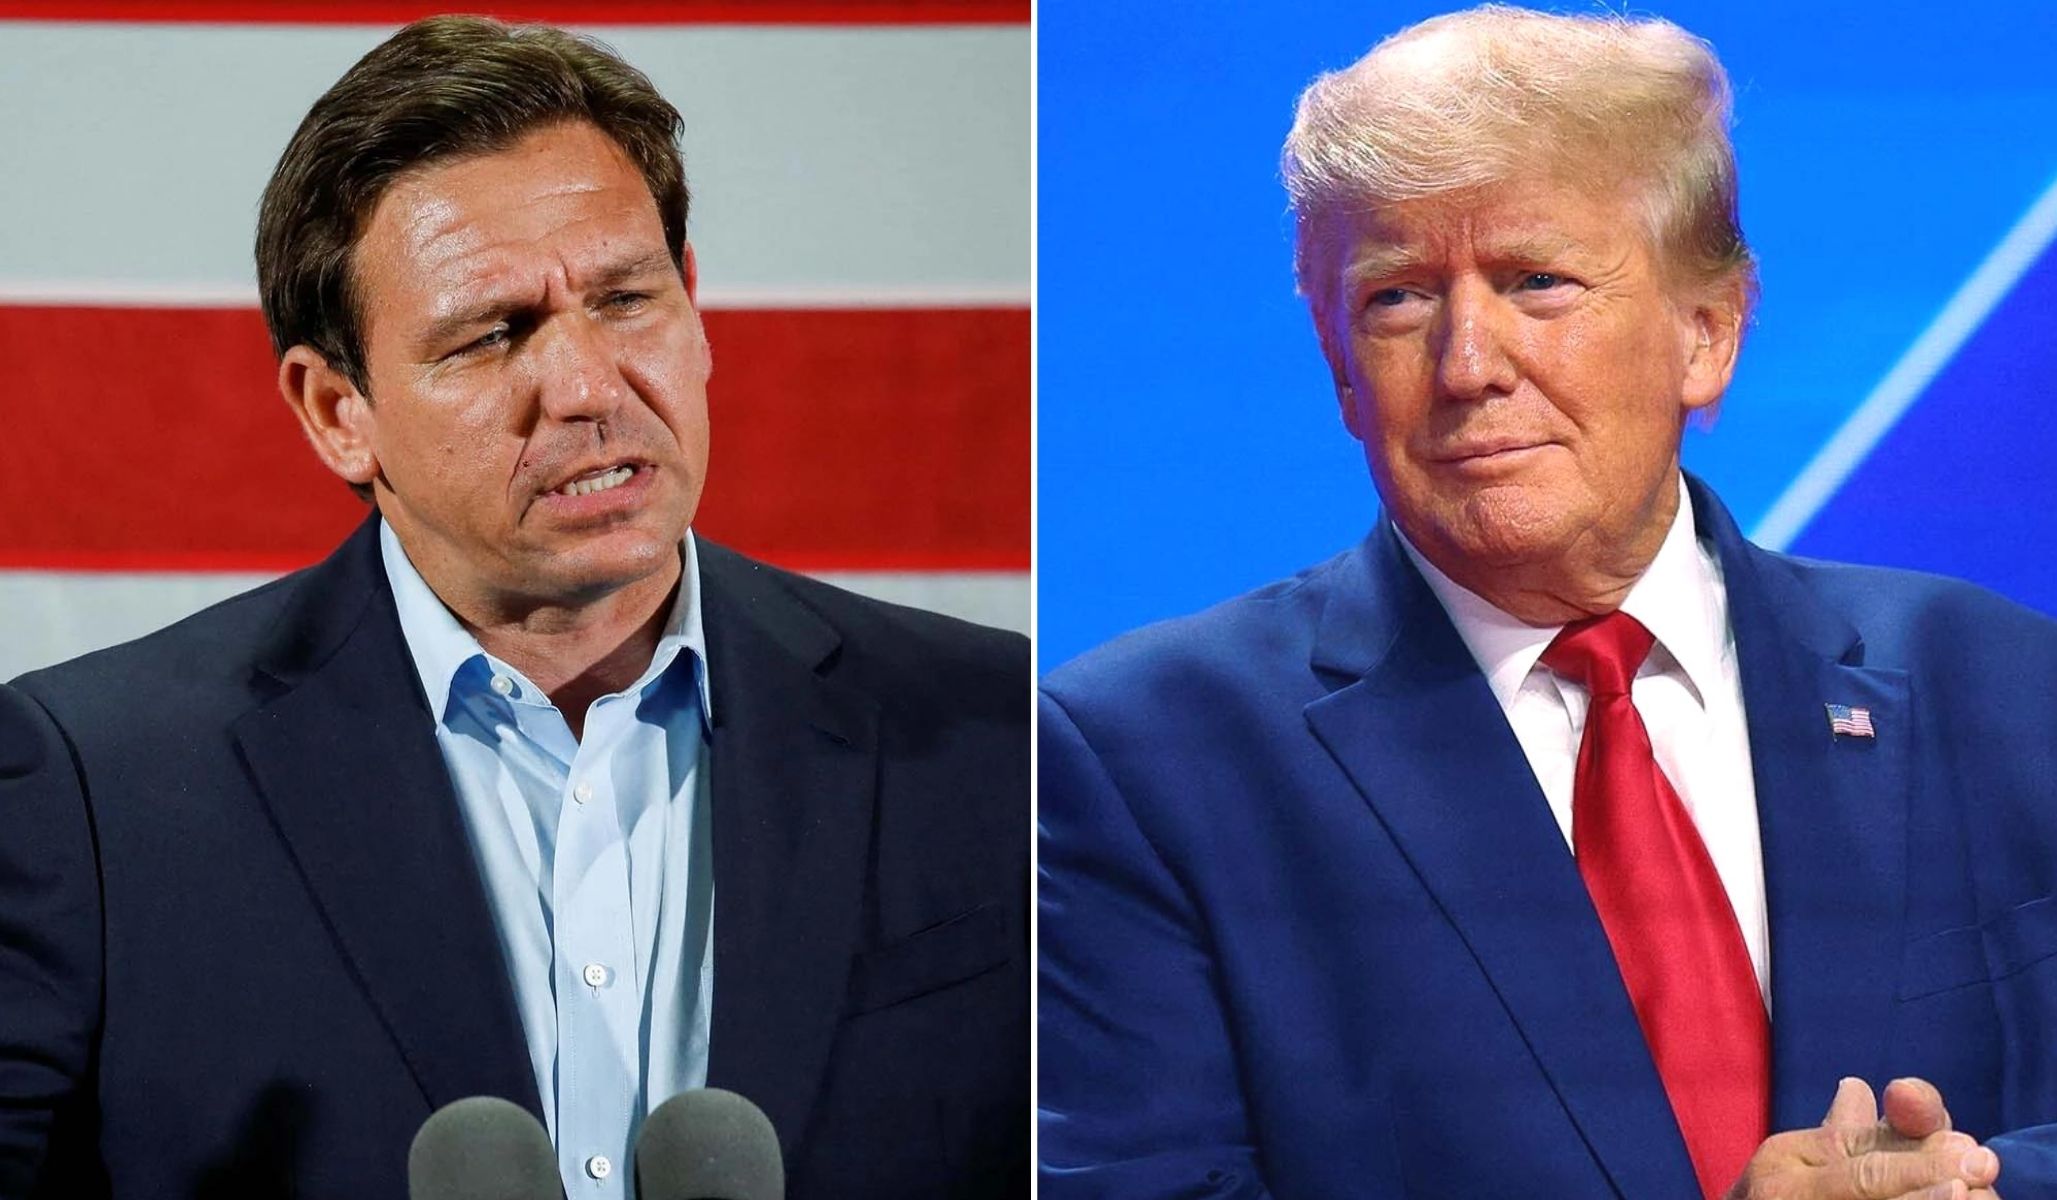 NextImg:The Corner: A new St. Anselm College poll of the 2024 New Hampshire GOP primary shows Trump leading DeSantis 42 percent to 29 percent. 